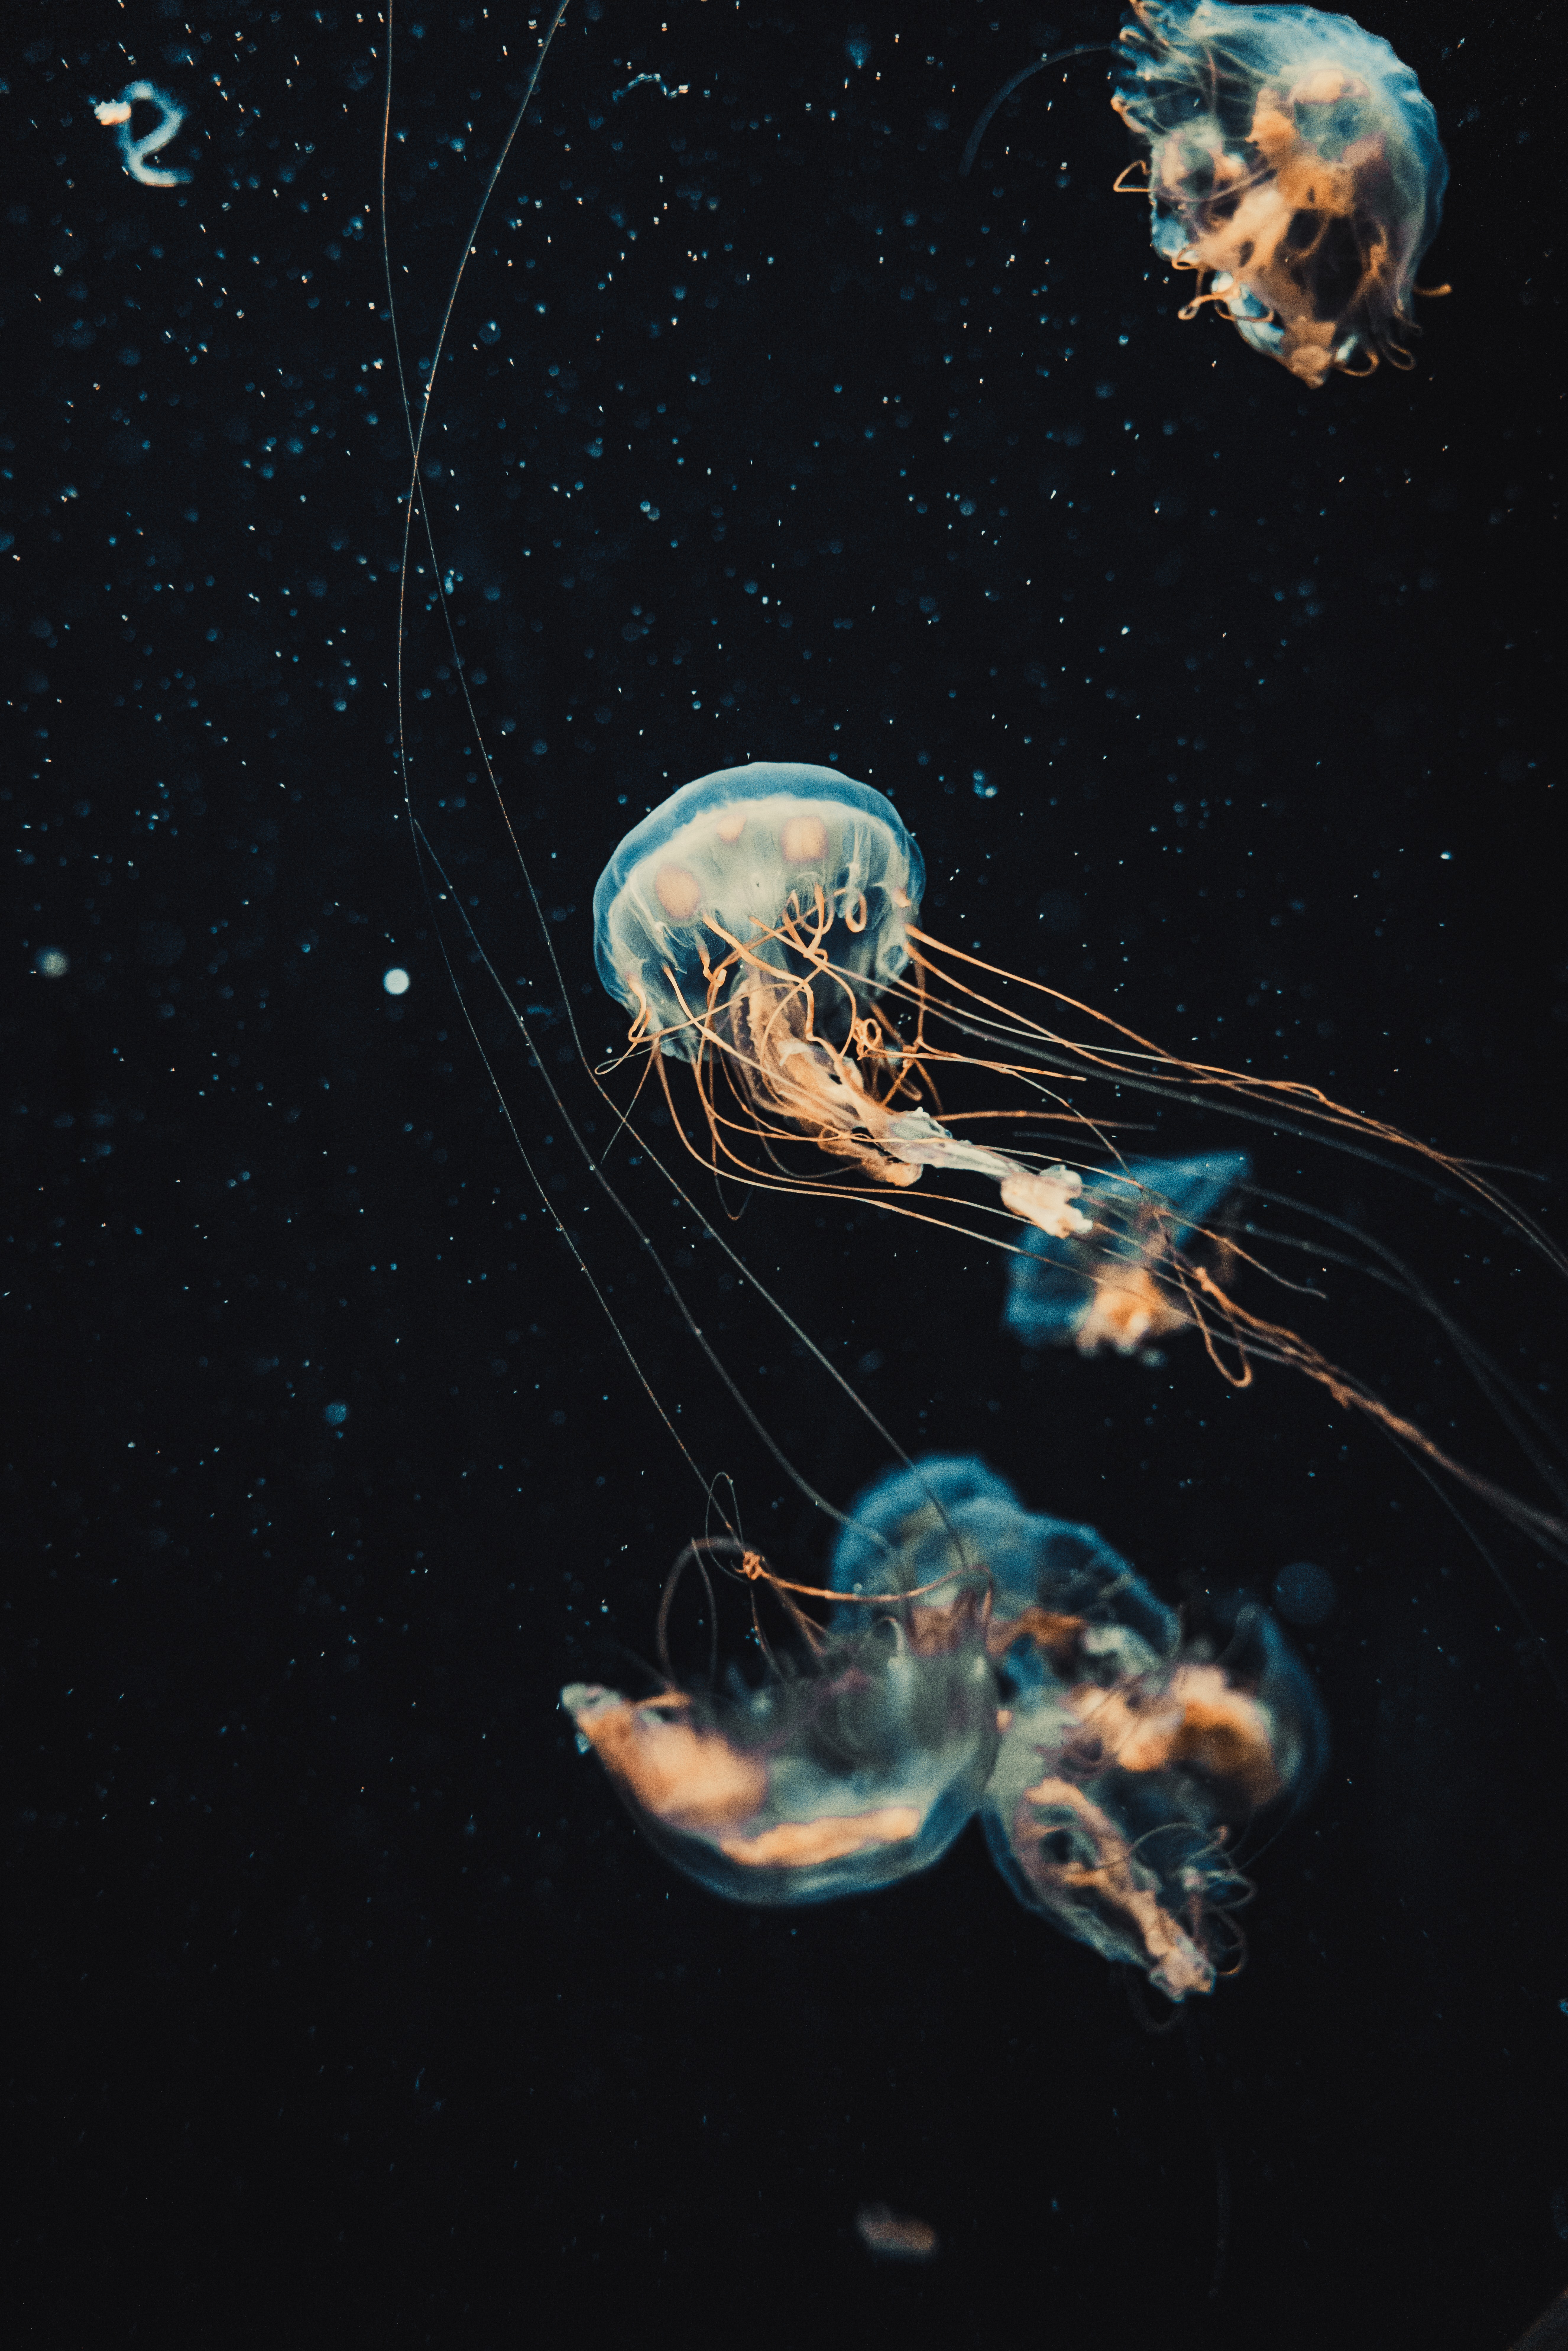 Wallpaper for mobile devices jellyfish, tentacles, water, dark